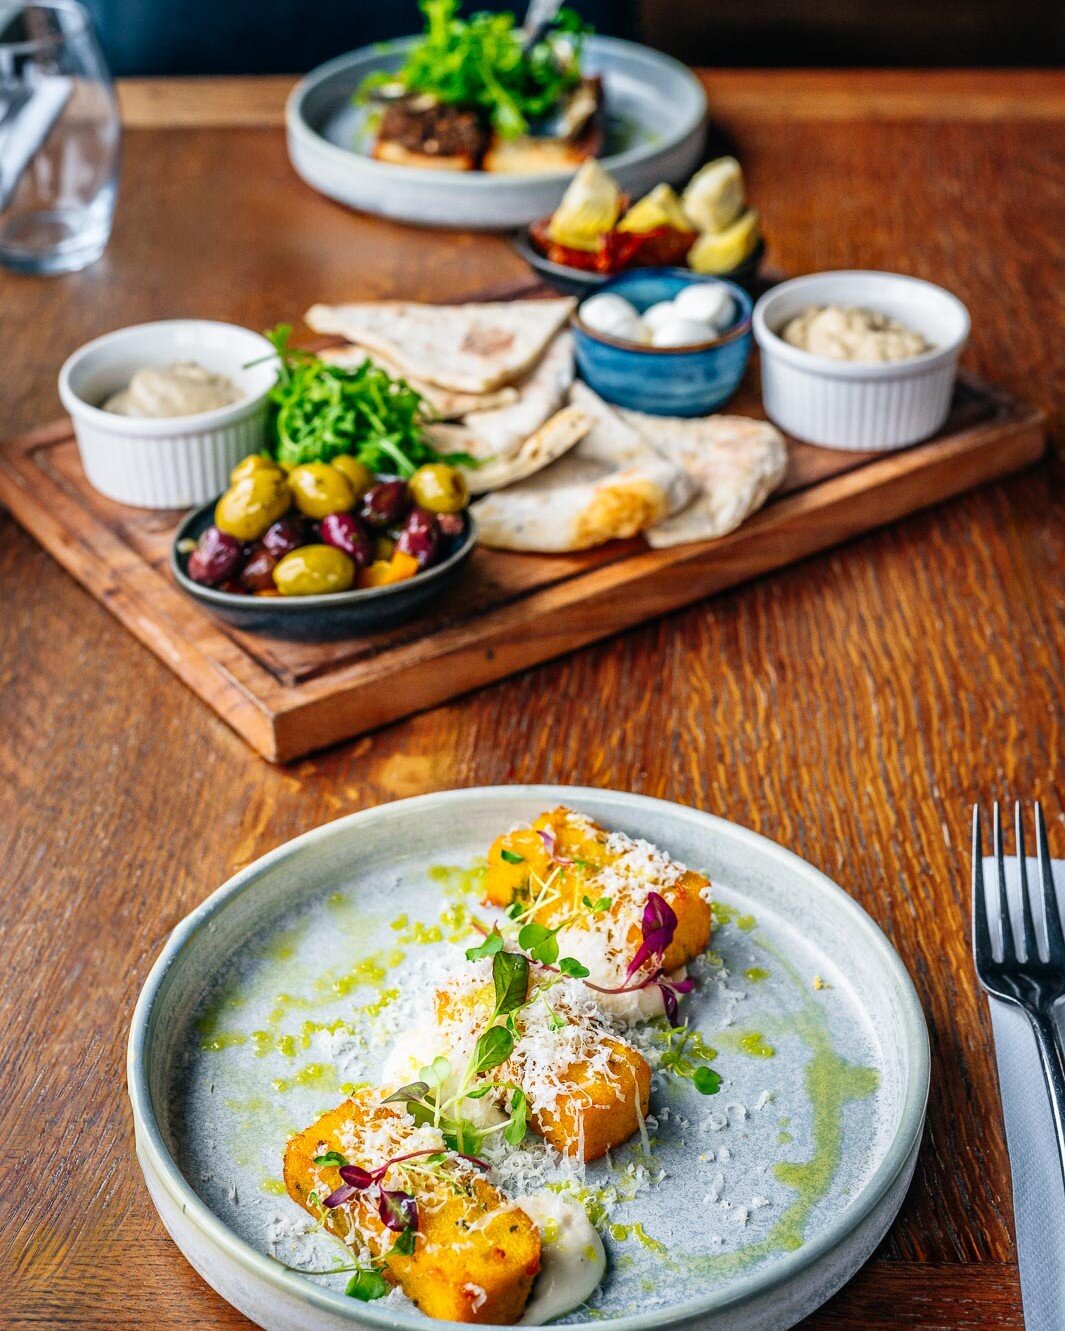 Spring loading...🌱

Our new seasonal menu is full of bright, punchy flavours and elevated classics. Highlights include Prawn Pil-Pil, Bacon Chop and Crispy Polenta with truffle oil.

Join us for lunch or dinner and give the new dishes a try. Book in